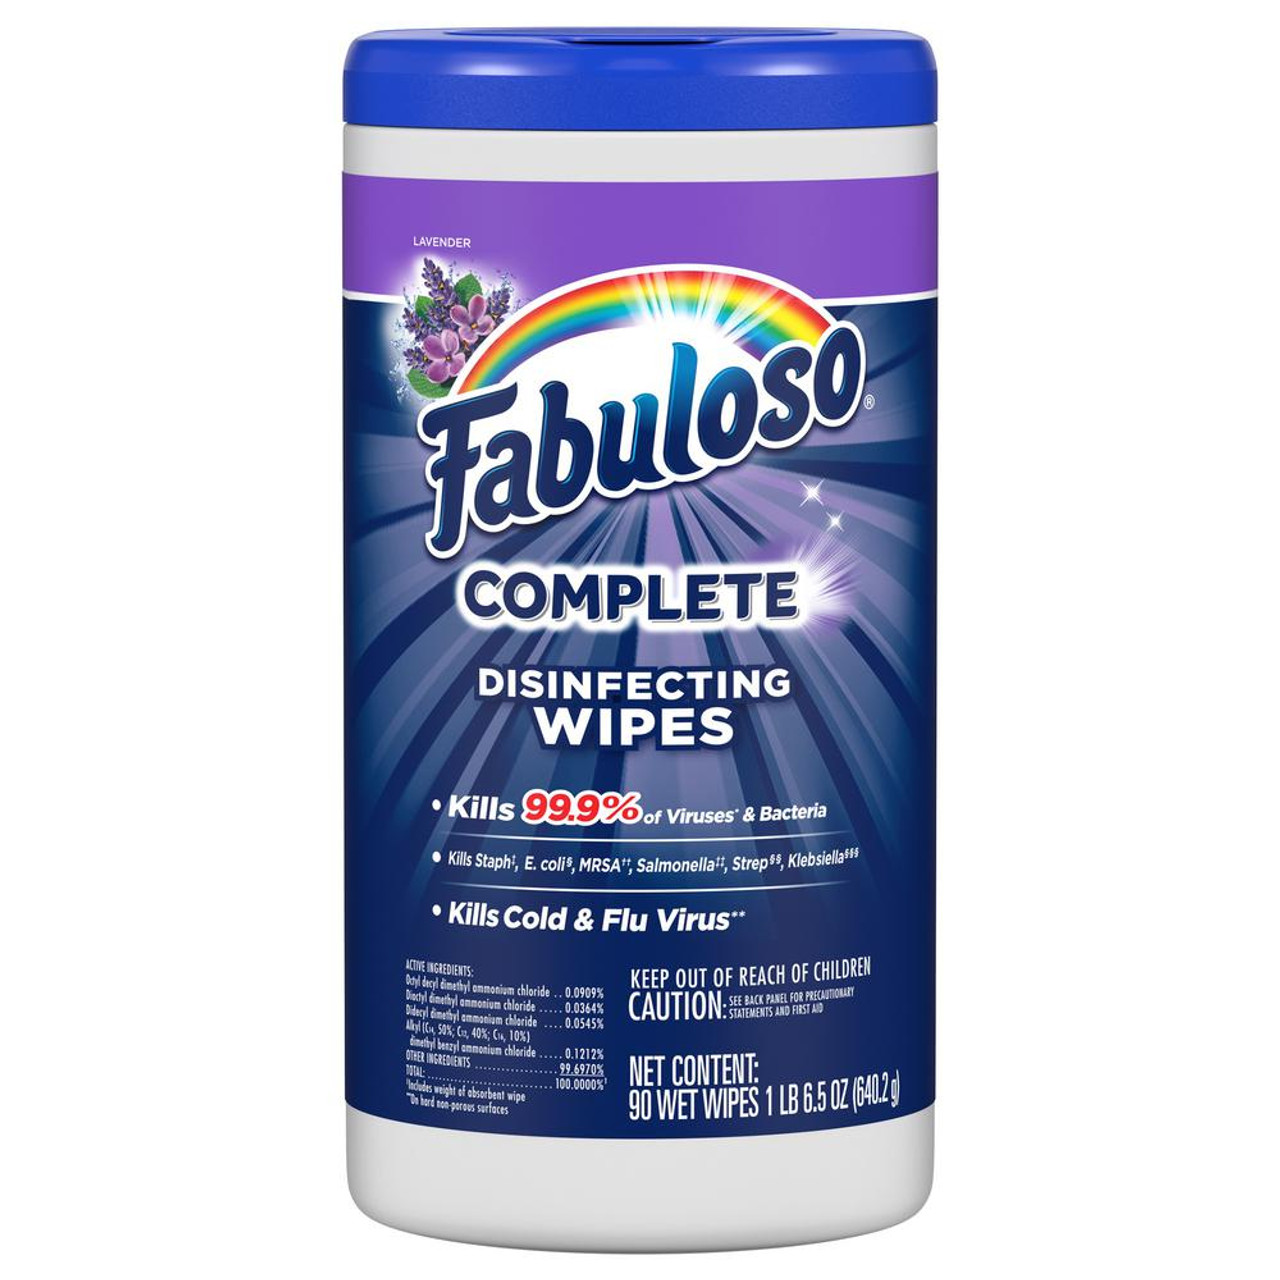 FABULOSO PROFESSIONAL DEGREASER CLEANER LAVENDER - US Foods CHEF'STORE